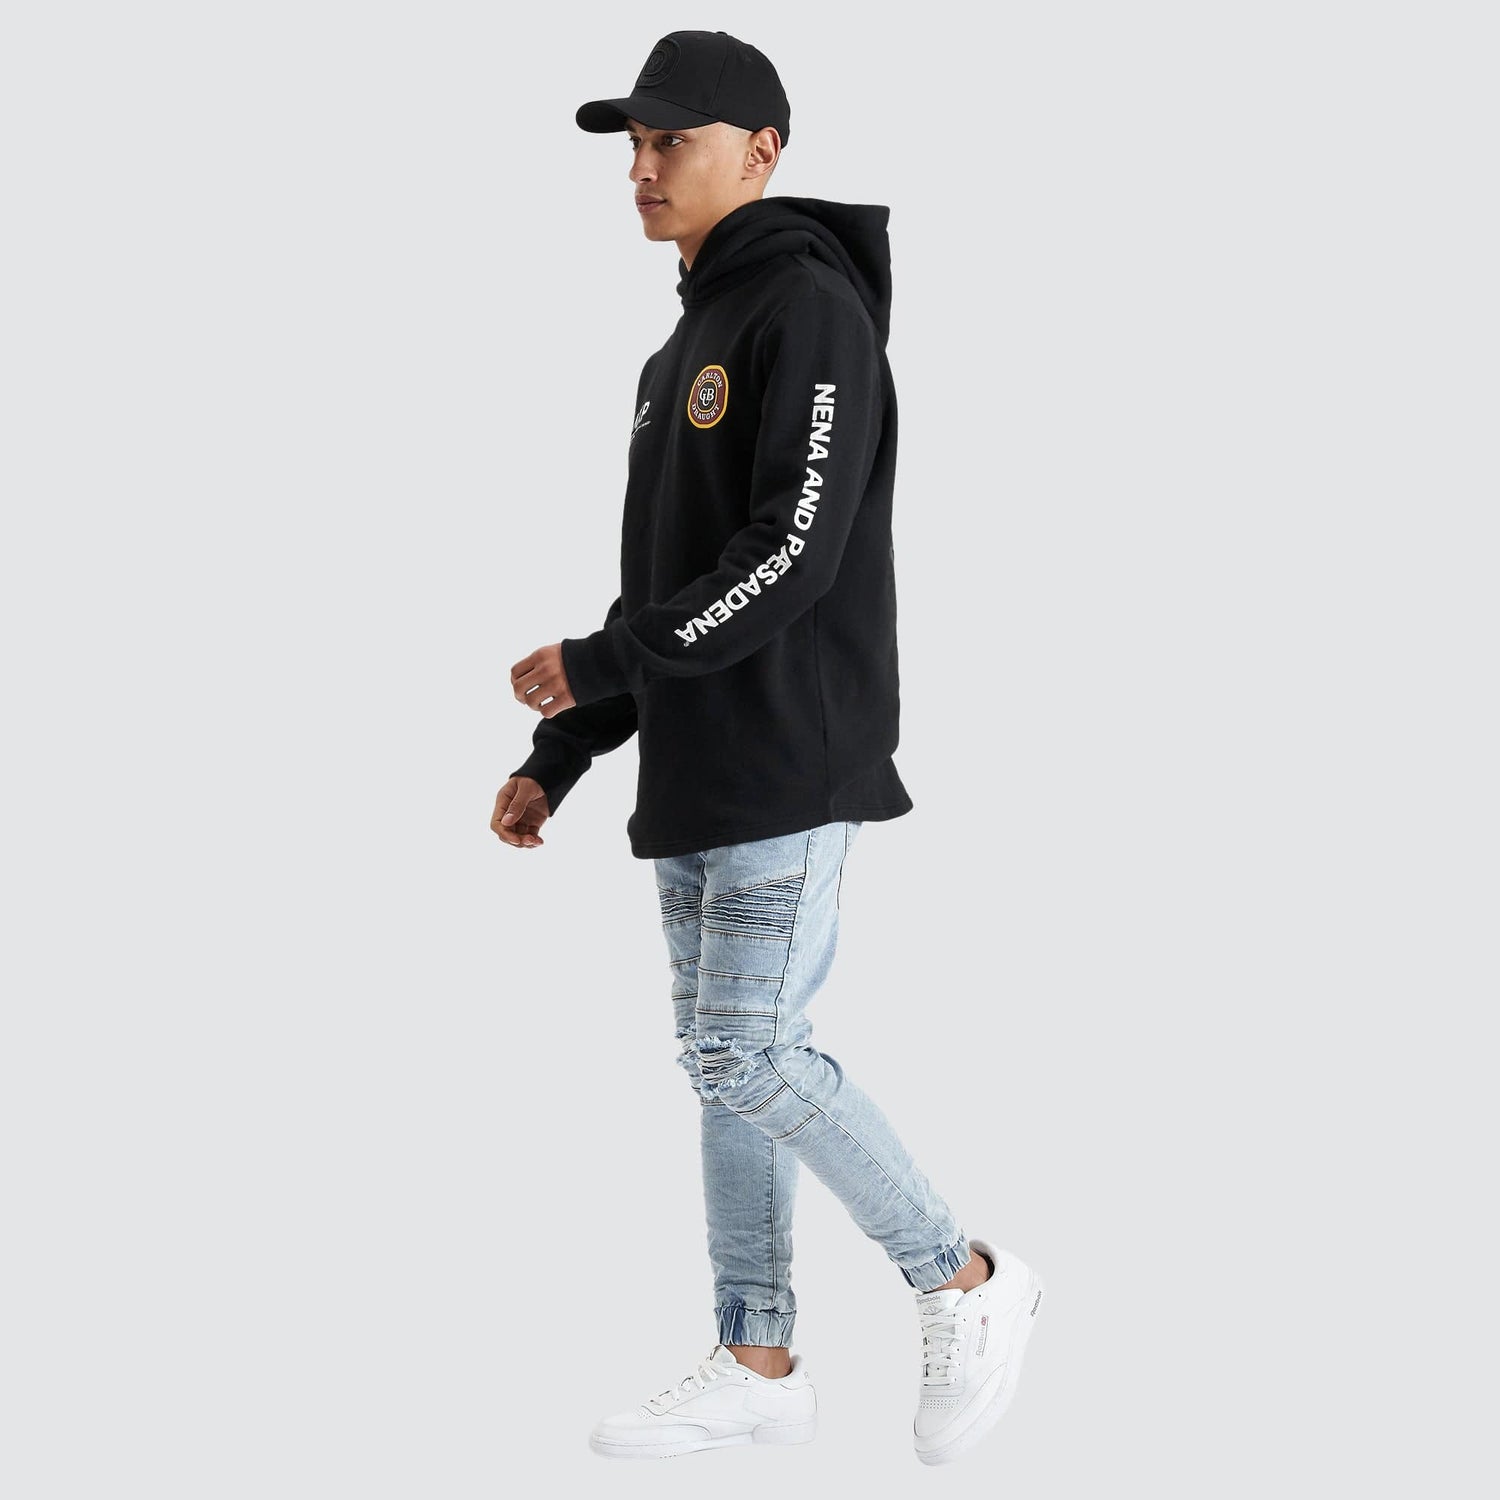 Drummond Dual Curved Hooded Sweater Jet Black